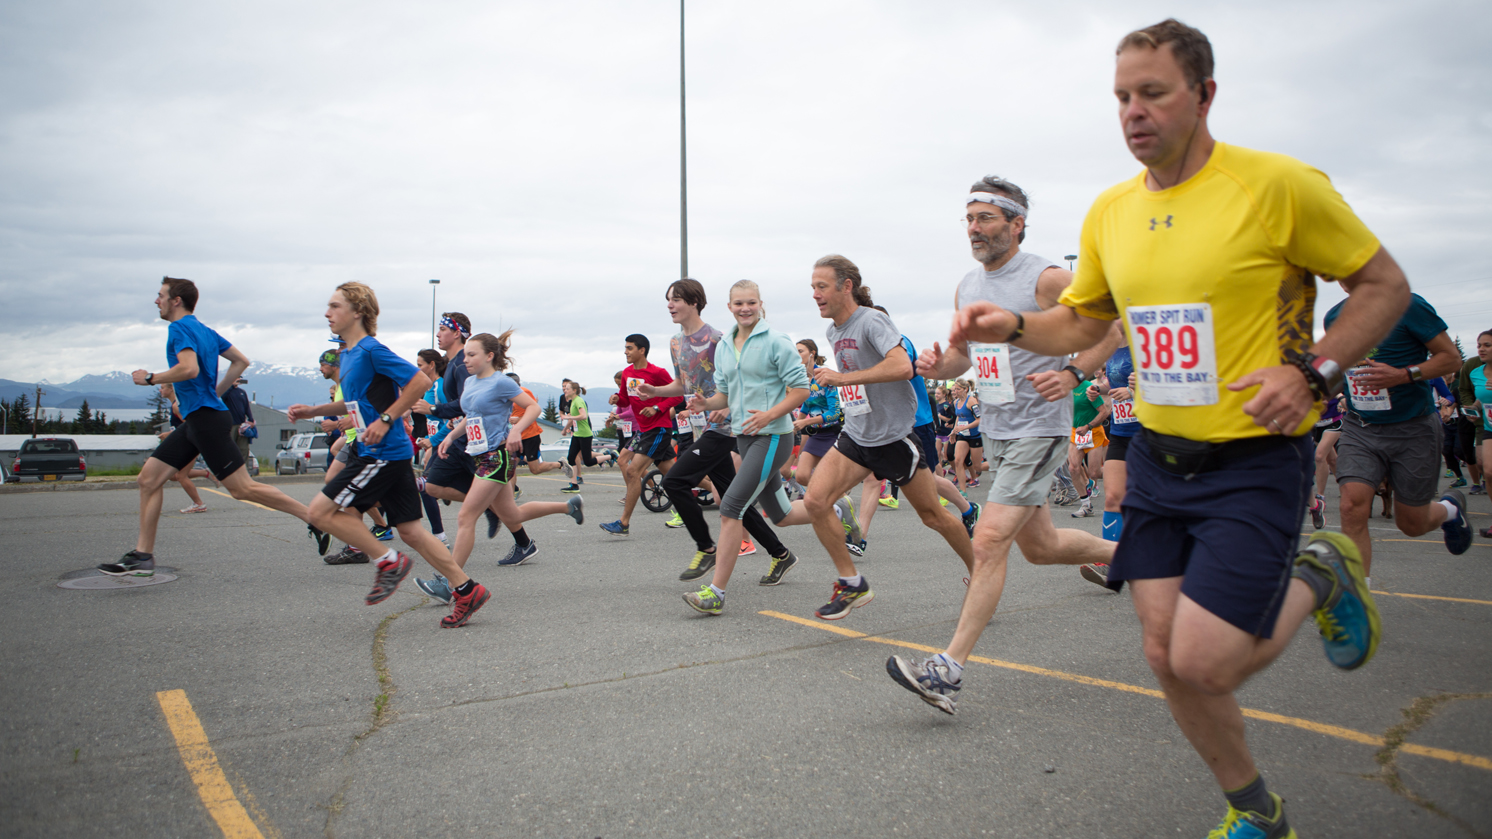 A crowd of nearly 300 runners starts the annual Spit Run at Homer High School on Saturday.-Photo by Aaron Carpenter, Homer News